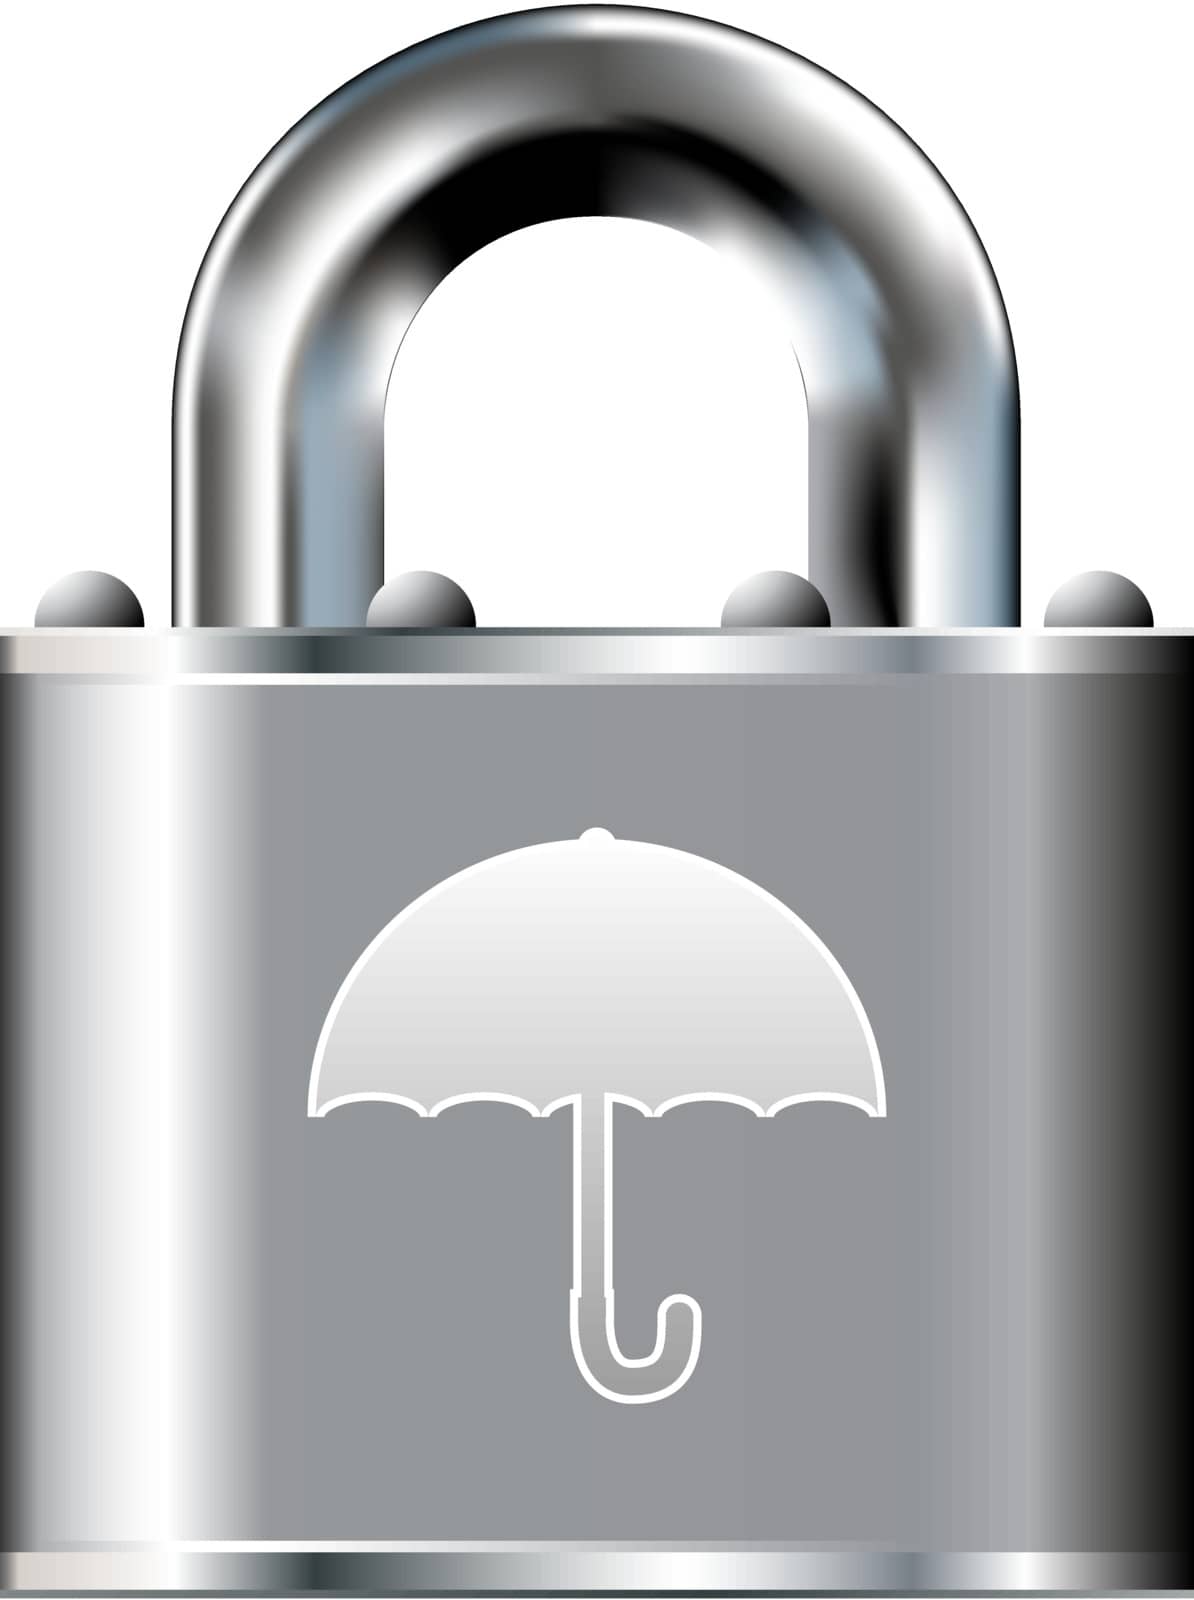 Umbrella security icon by lhfgraphics